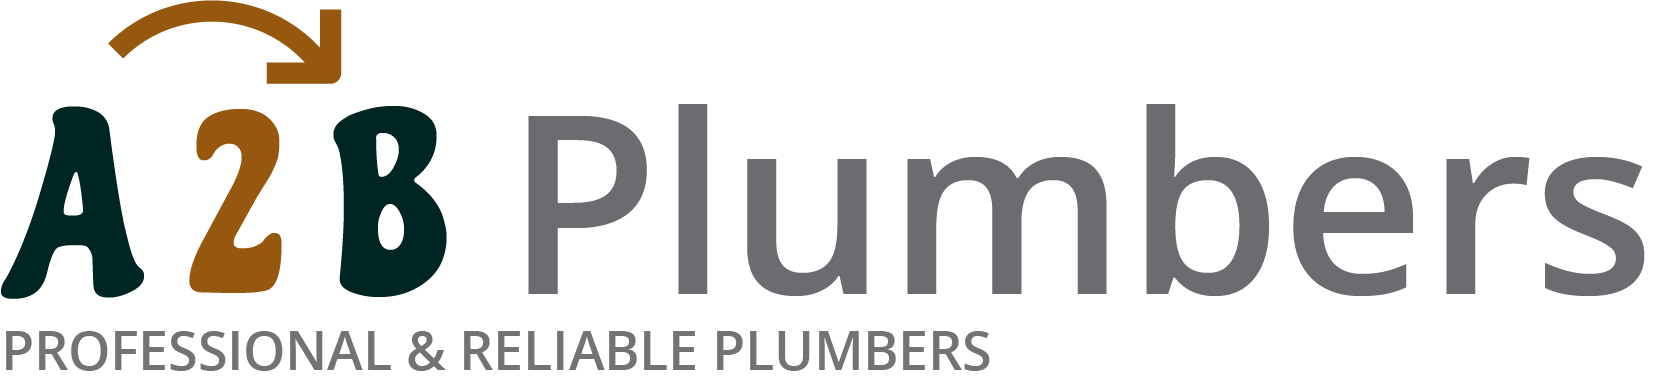 If you need a boiler installed, a radiator repaired or a leaking tap fixed, call us now - we provide services for properties in Hebburn and the local area.